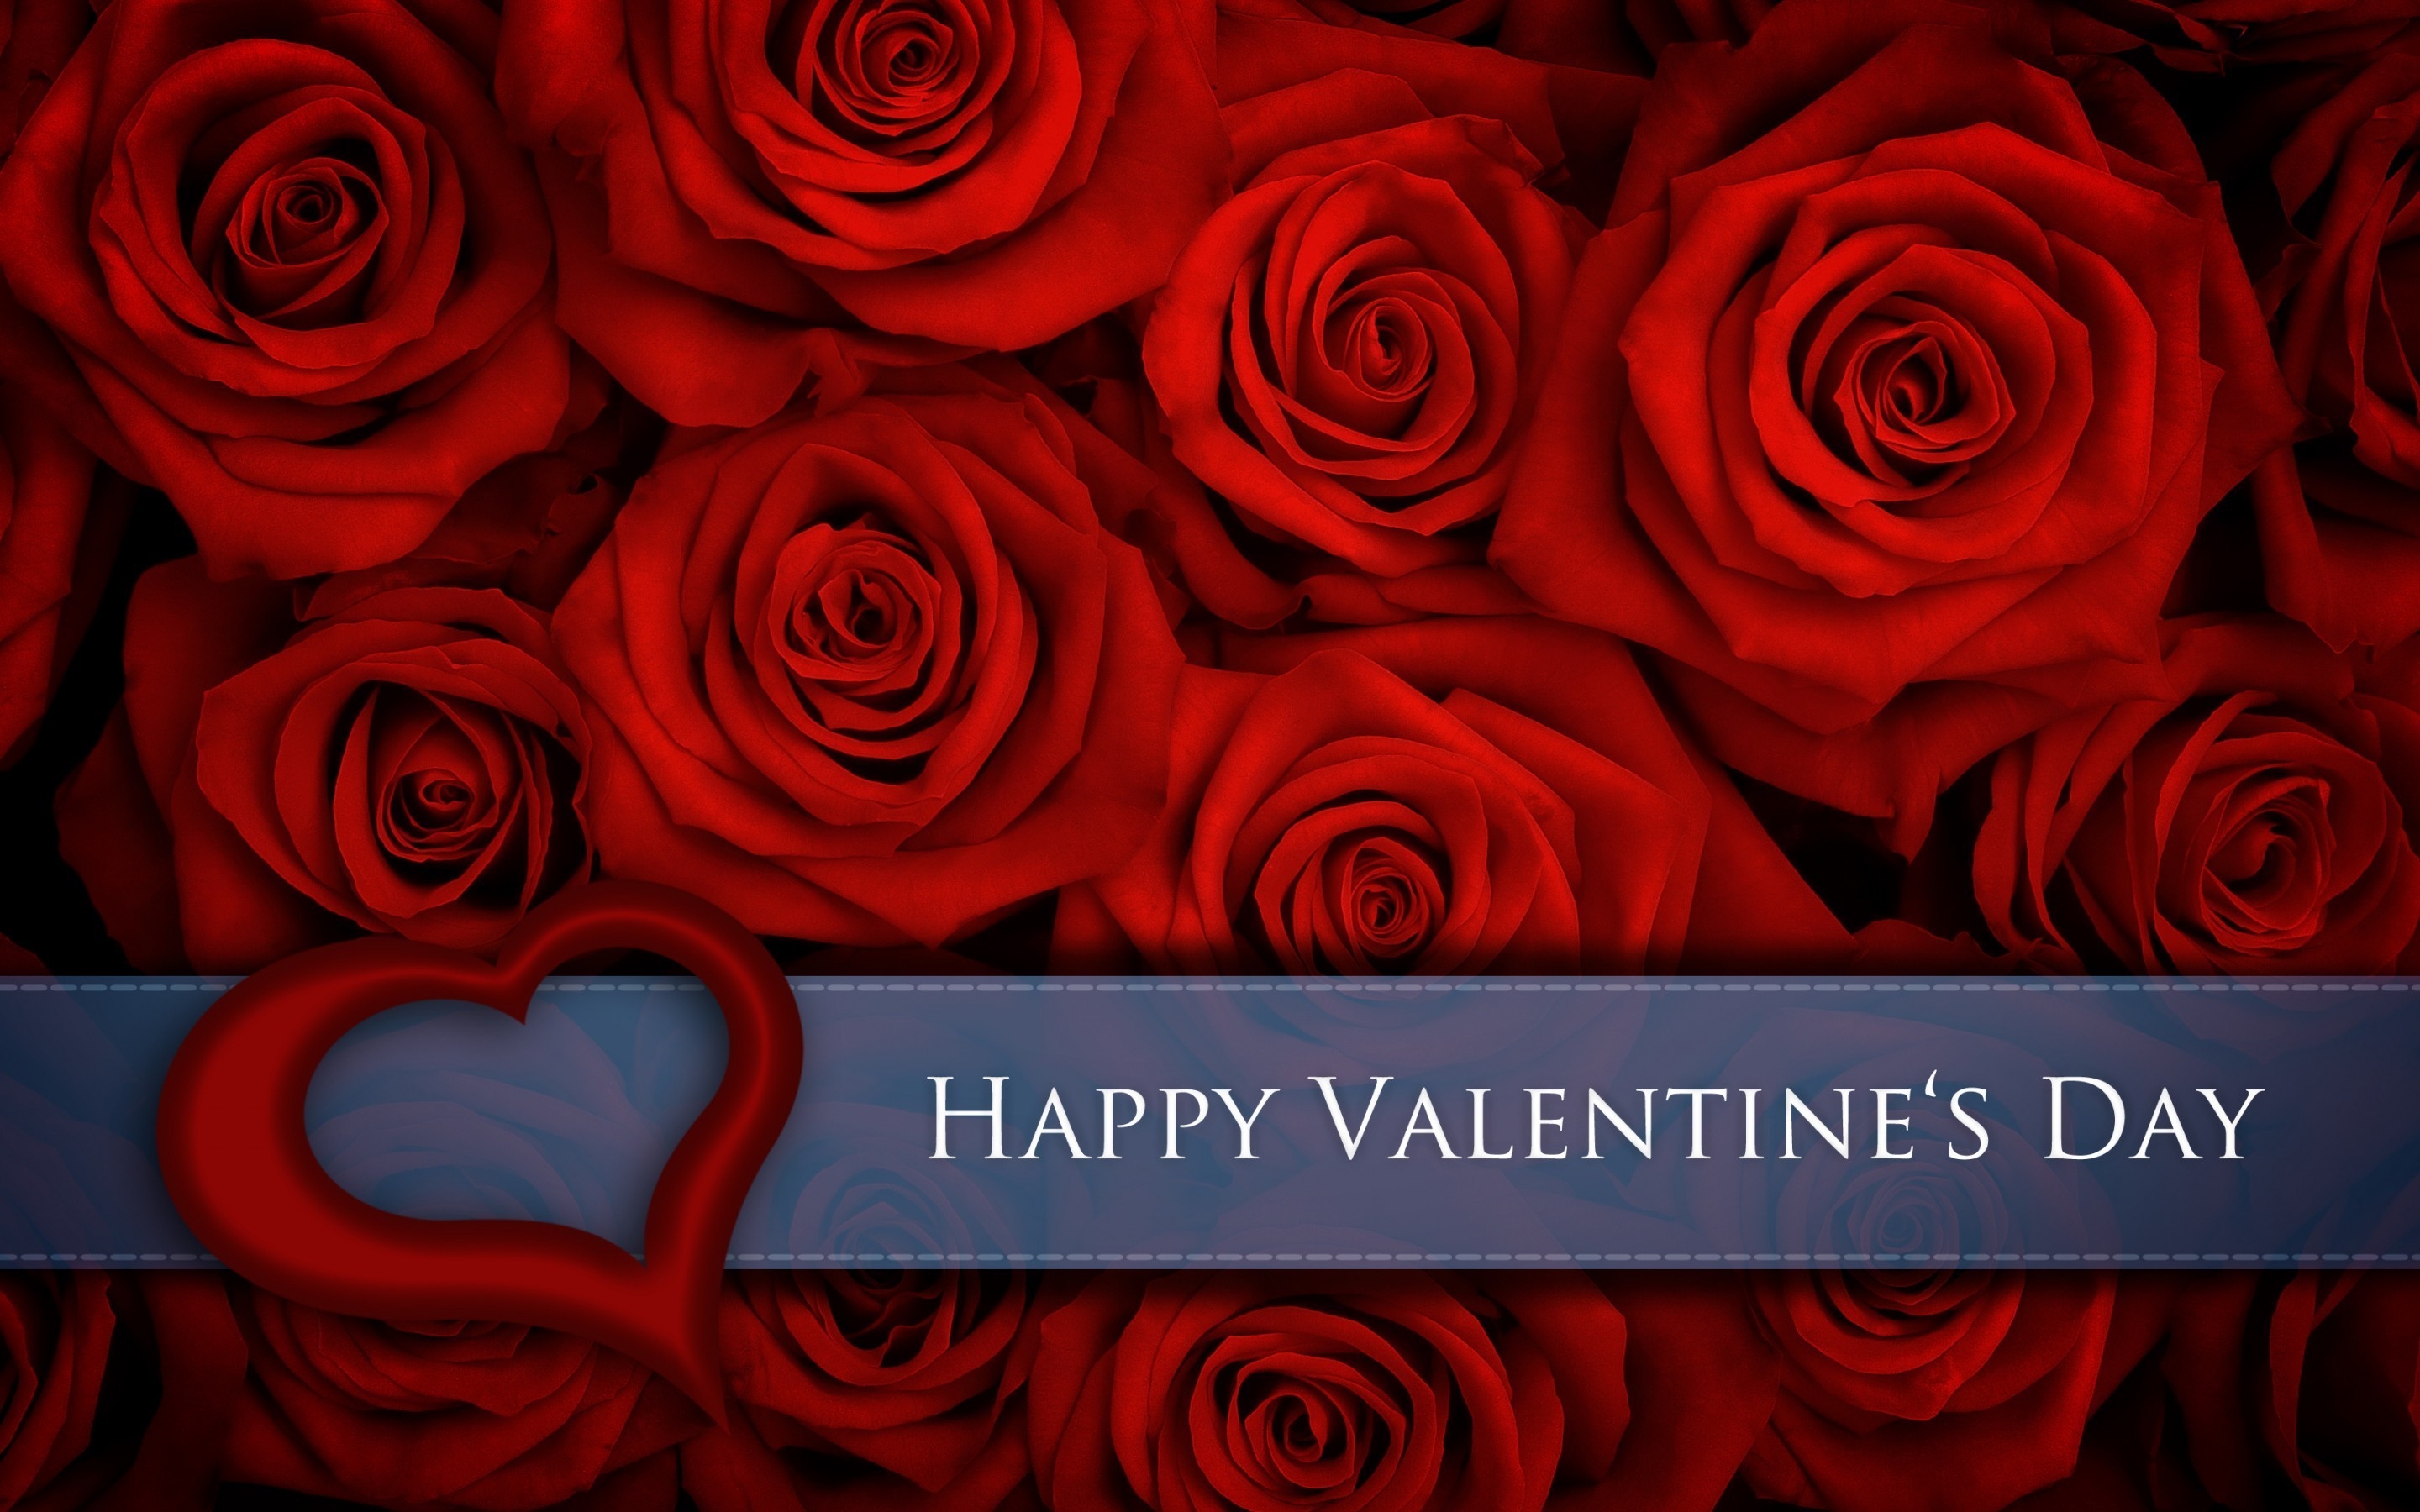 Red Roses for Valentines Day for 2880 x 1800 Retina Display resolution